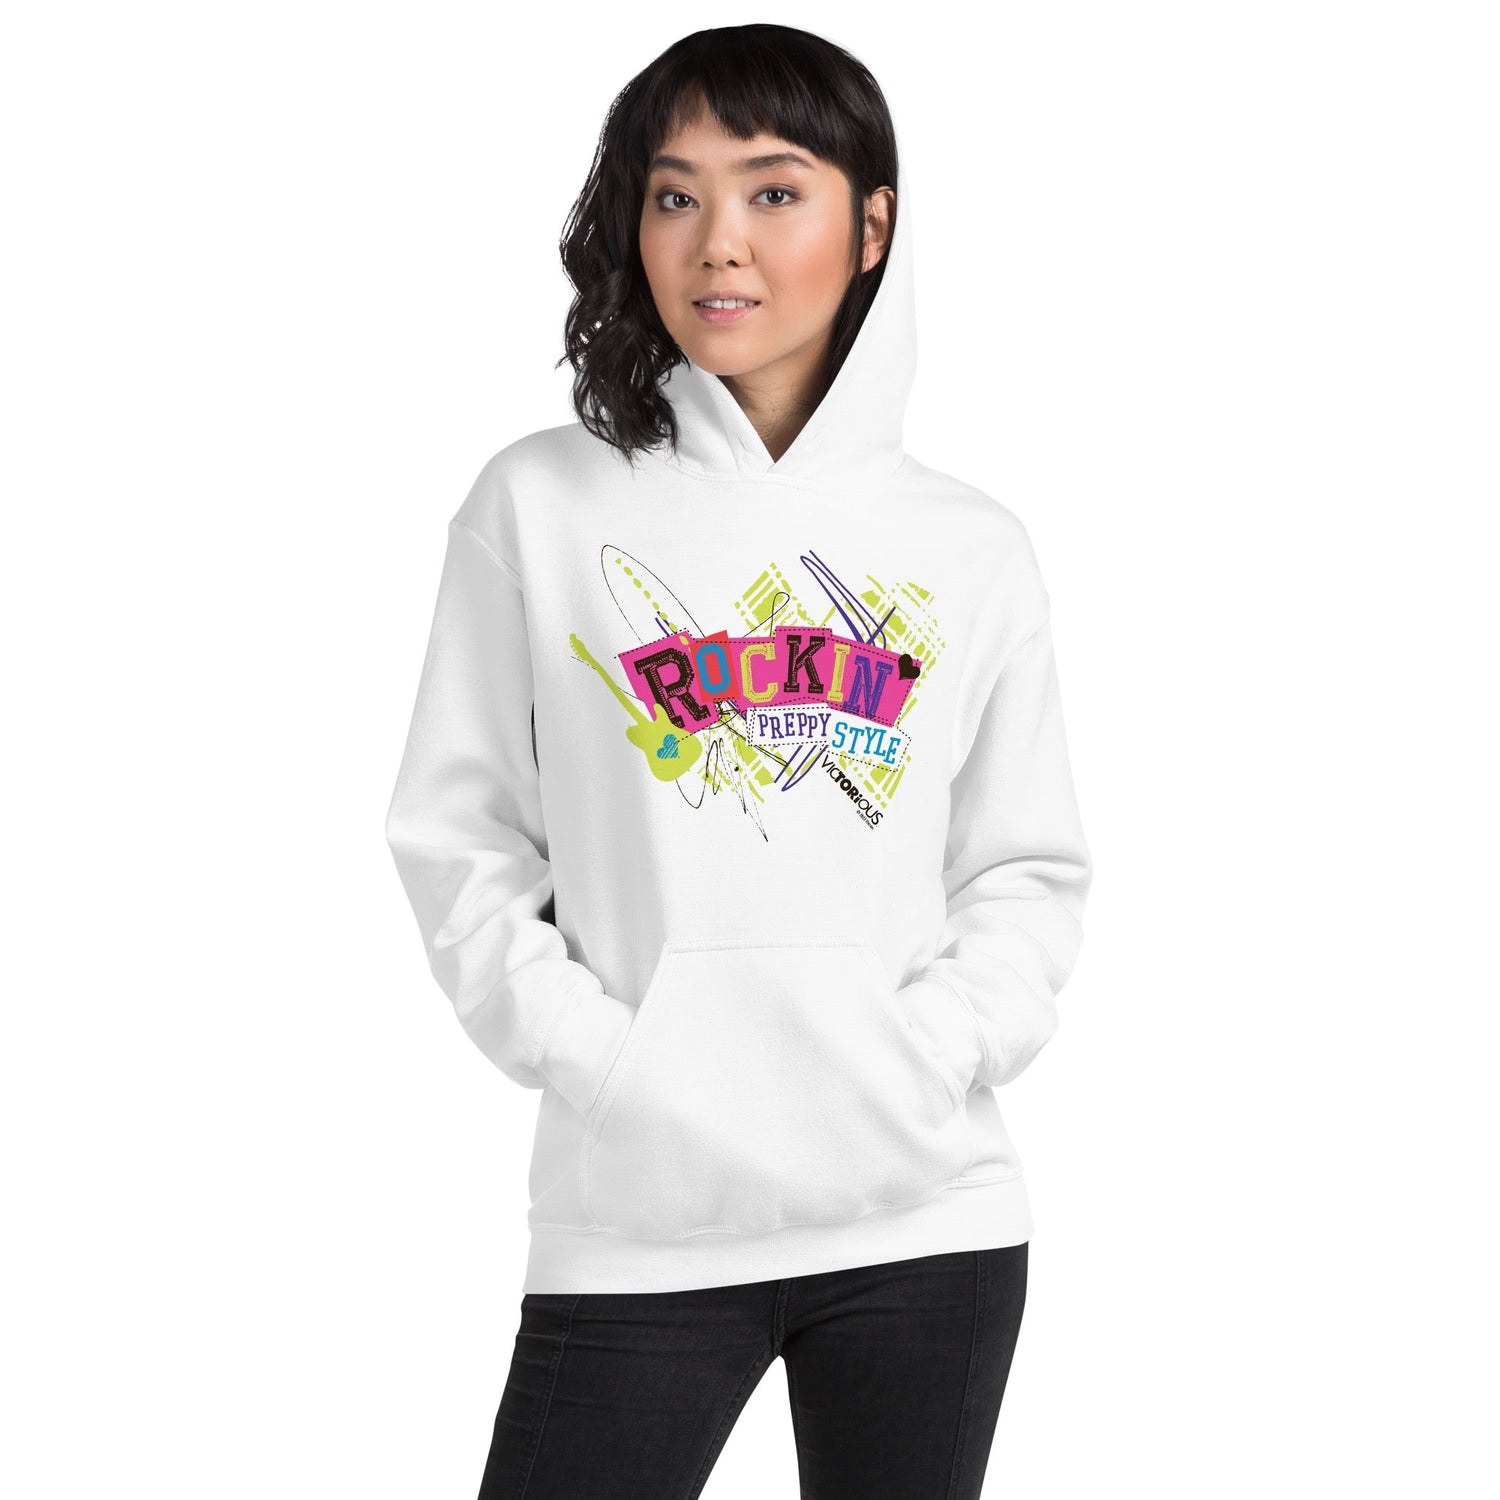 Victorious Rockin' Preppy Style Adult Hooded Sweatshirt - Paramount Shop